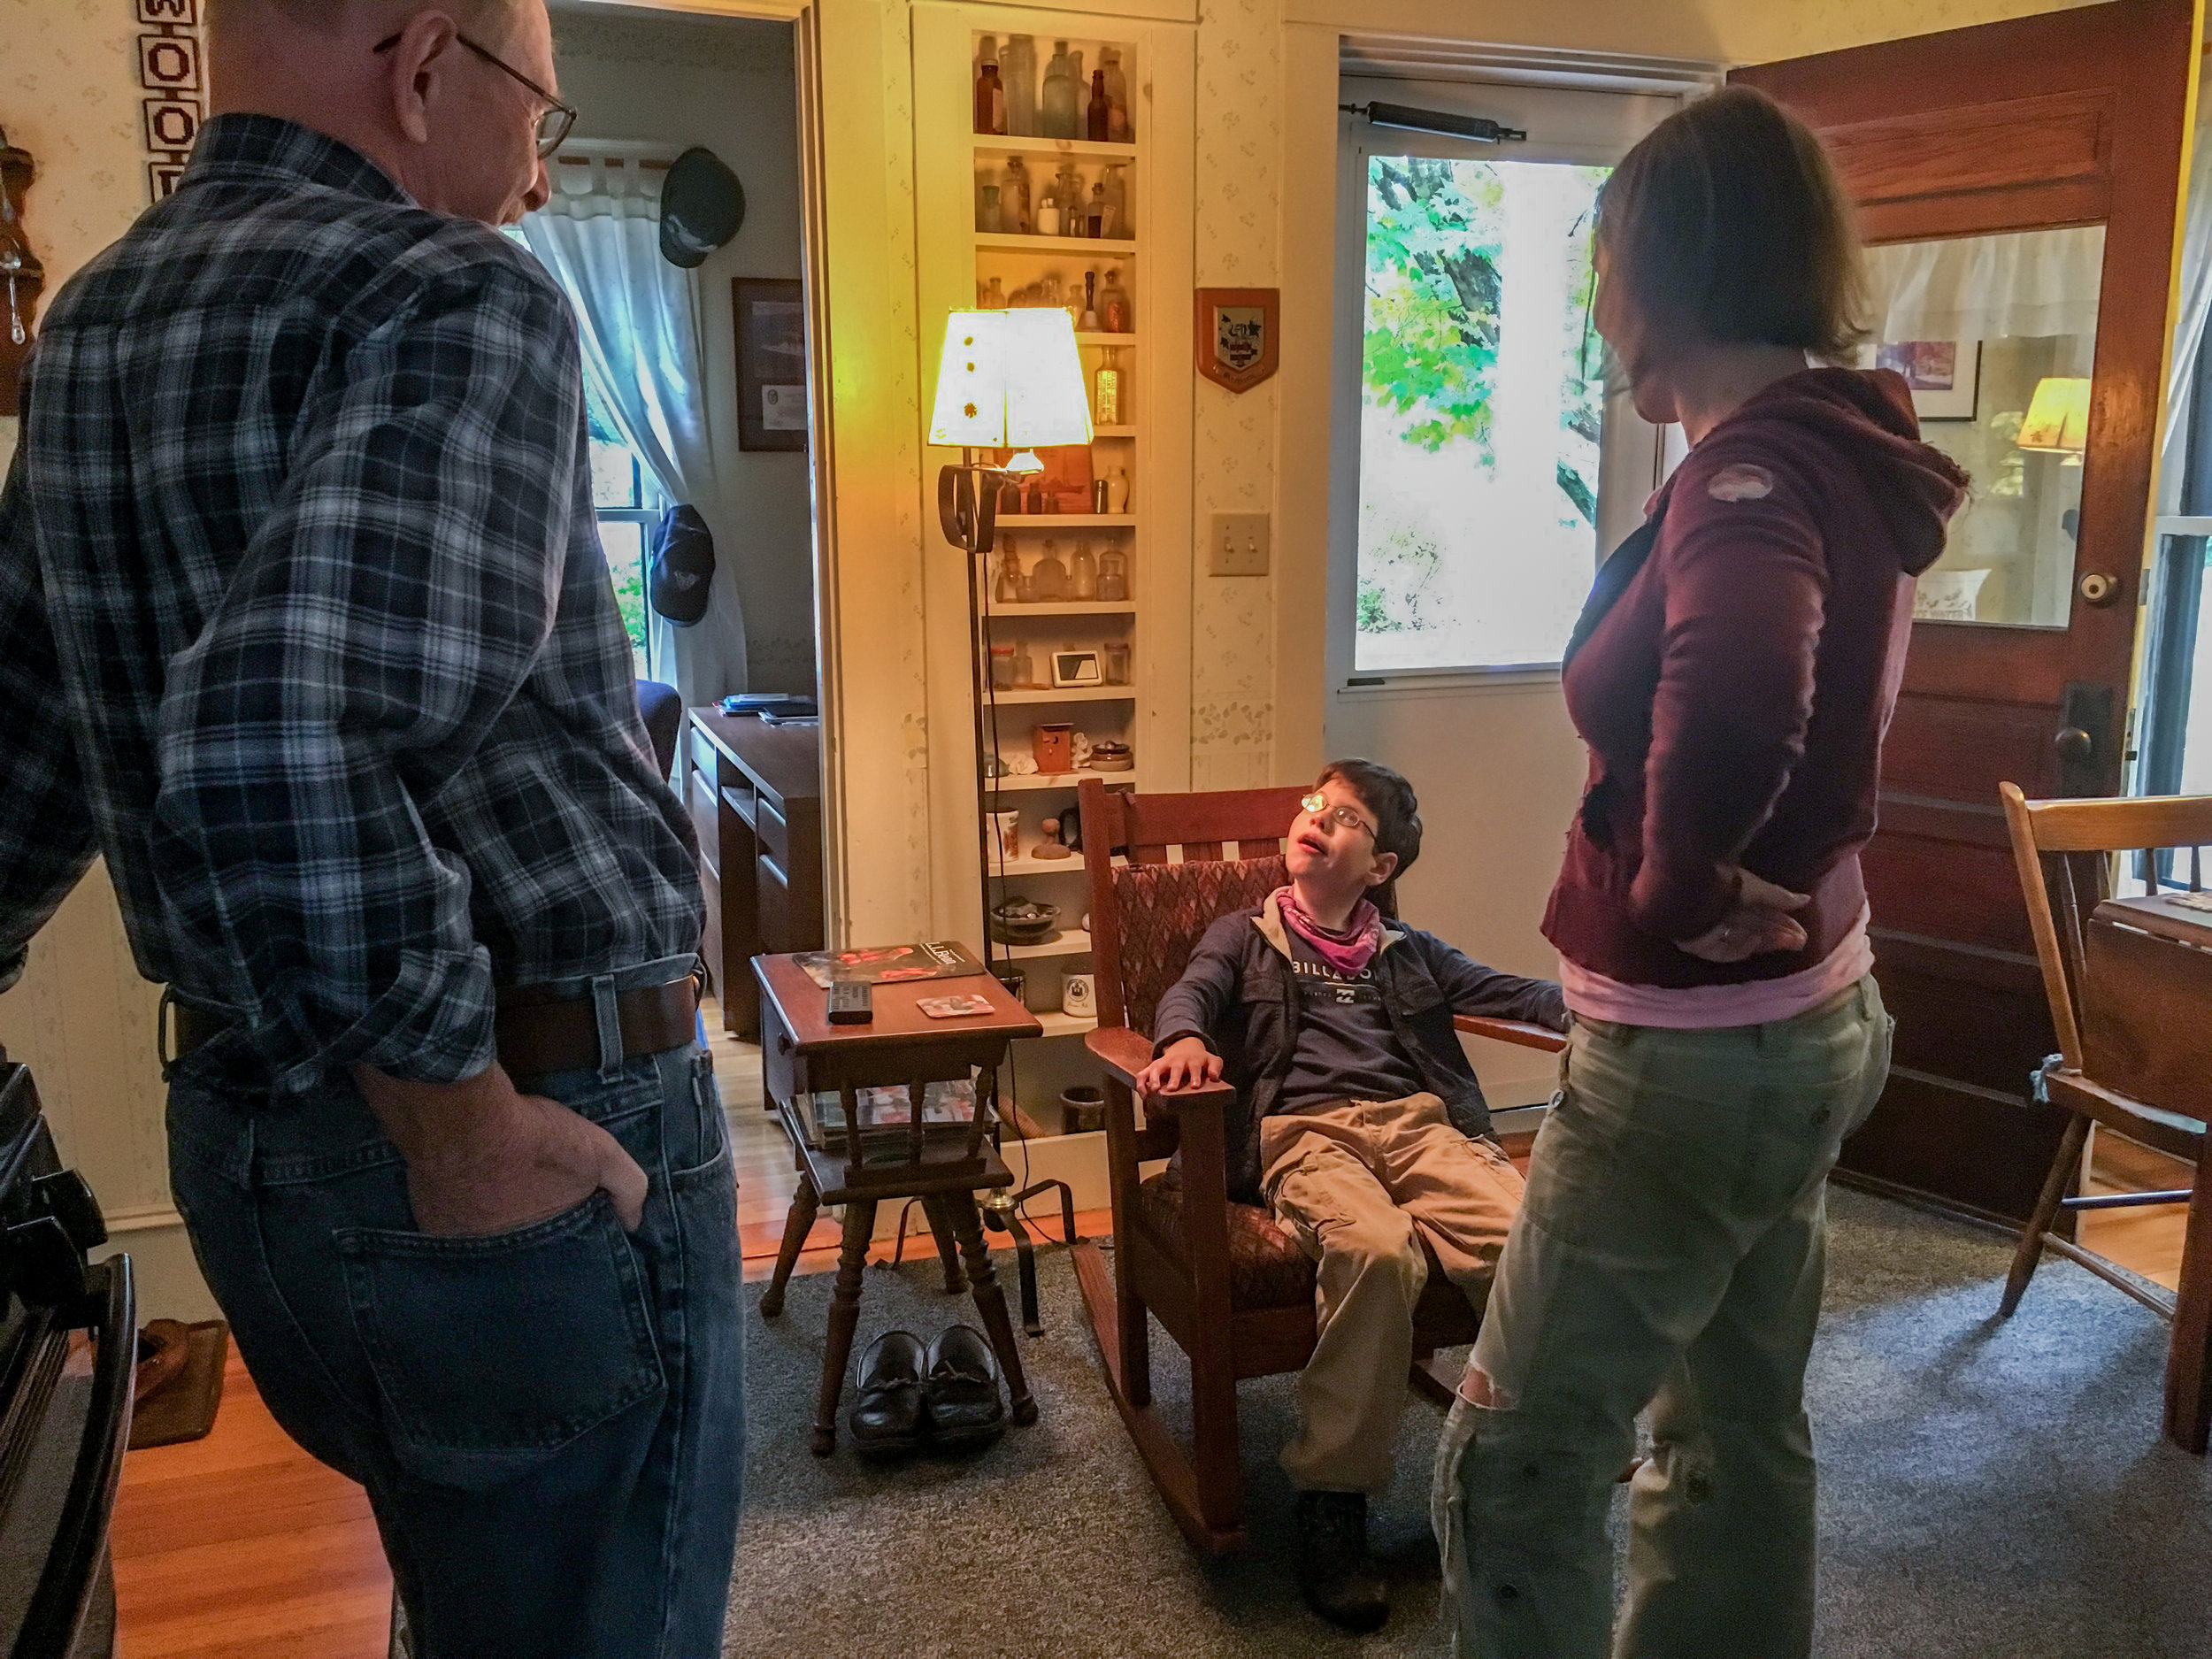  Calvin sits in a rocking chair eating a piece of chocolate at a neighbor's house on October 8, 2017 in Brunswick, Maine. Since reducing his benzo dose and adding cannabis to his treatment routine, Christy says Calvin has become calmer, more mobile, 